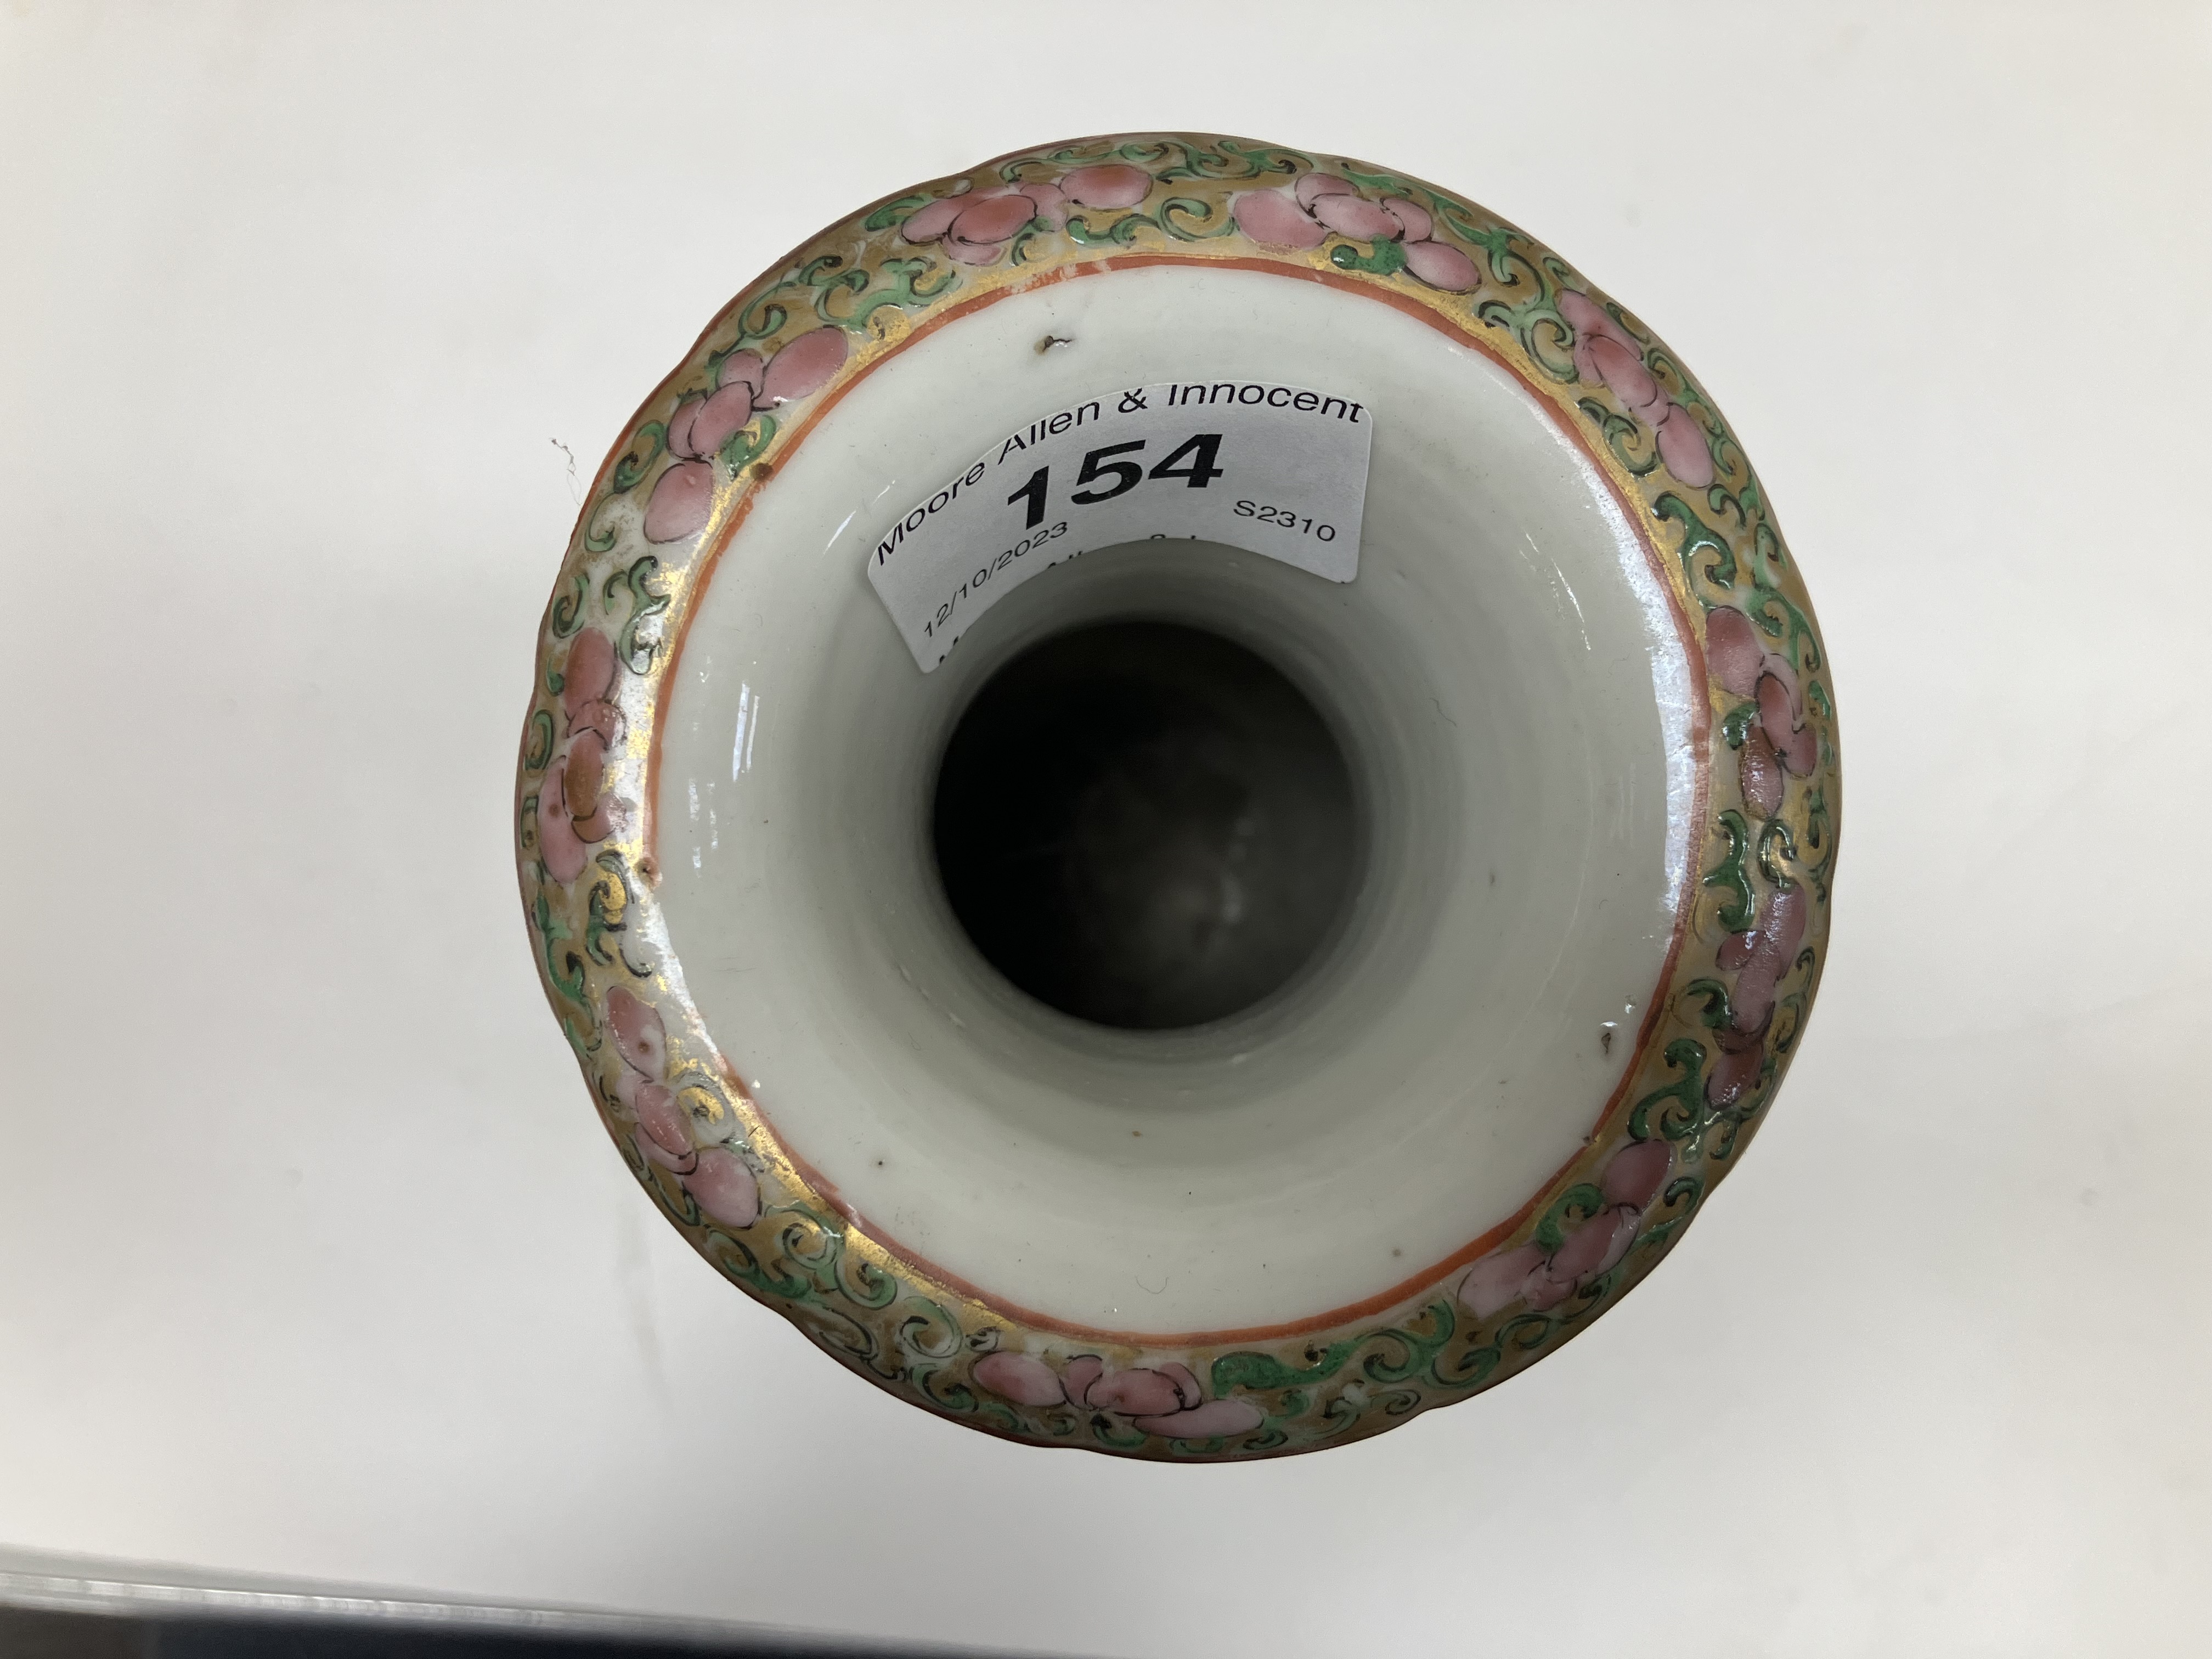 A Kosta Boda vase with engraved decoration depicting a woman playing the flute, signed and No'd. - Image 22 of 33